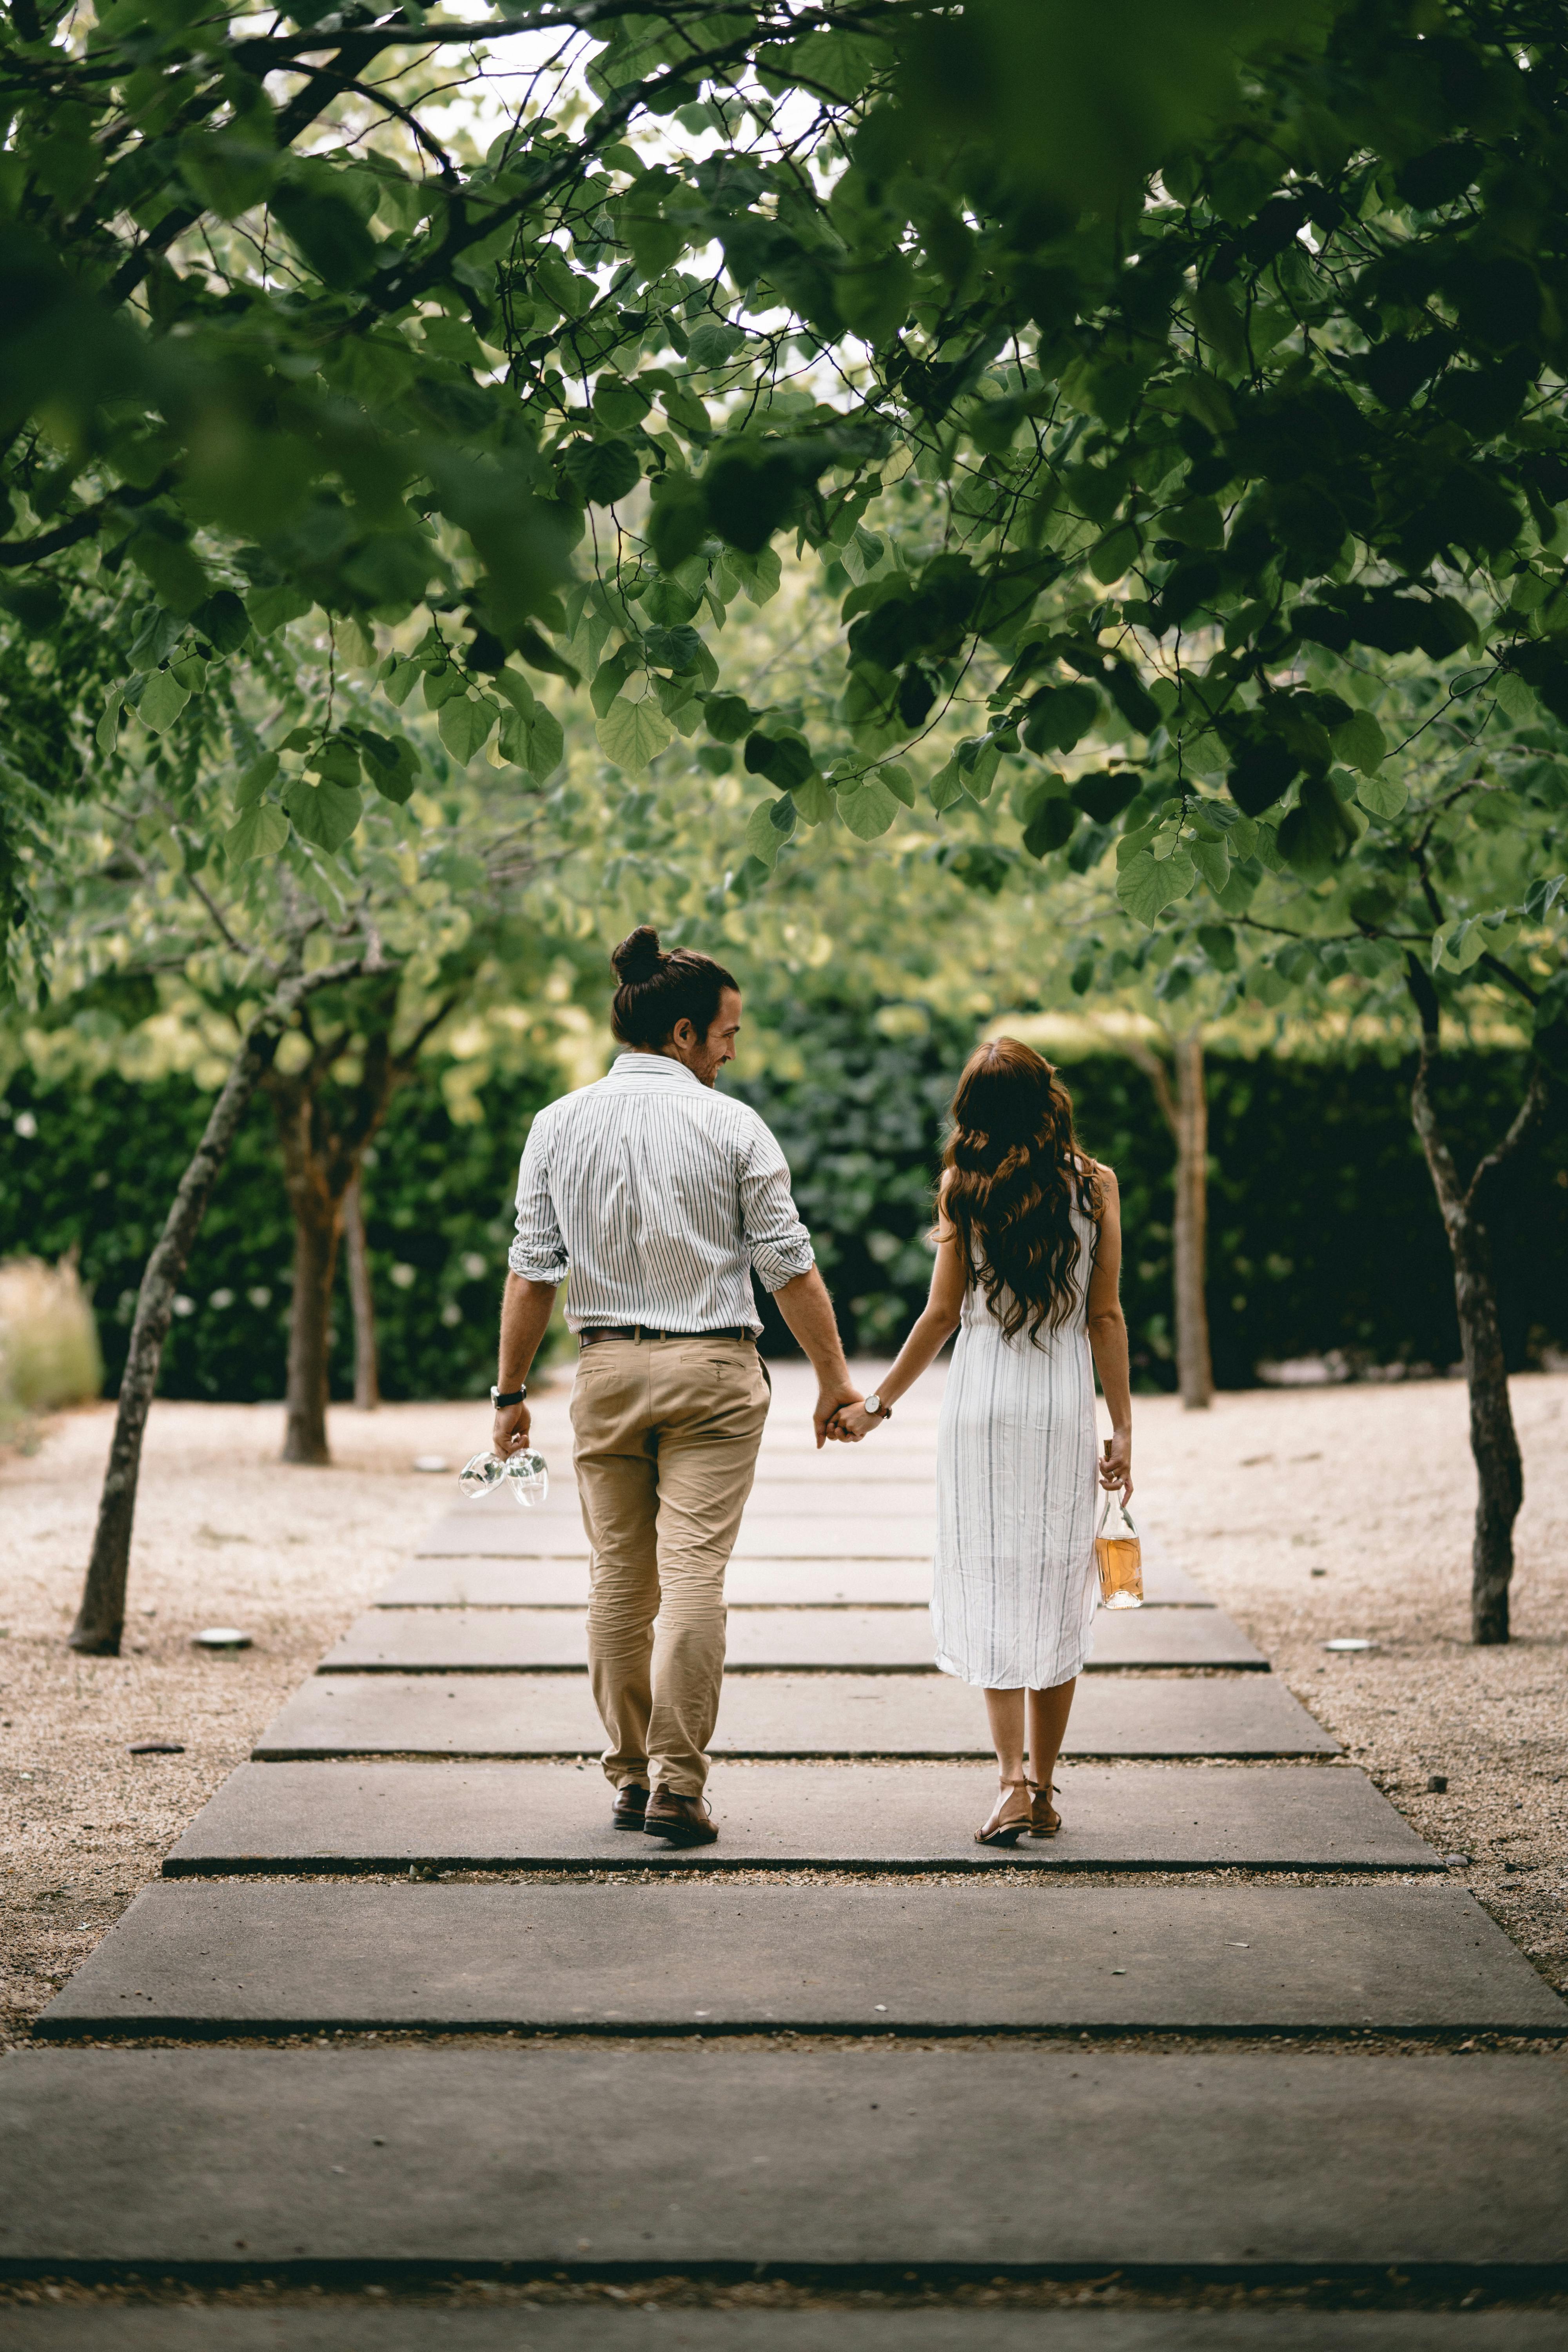 A couple walking hand in hand | Source: Pexels